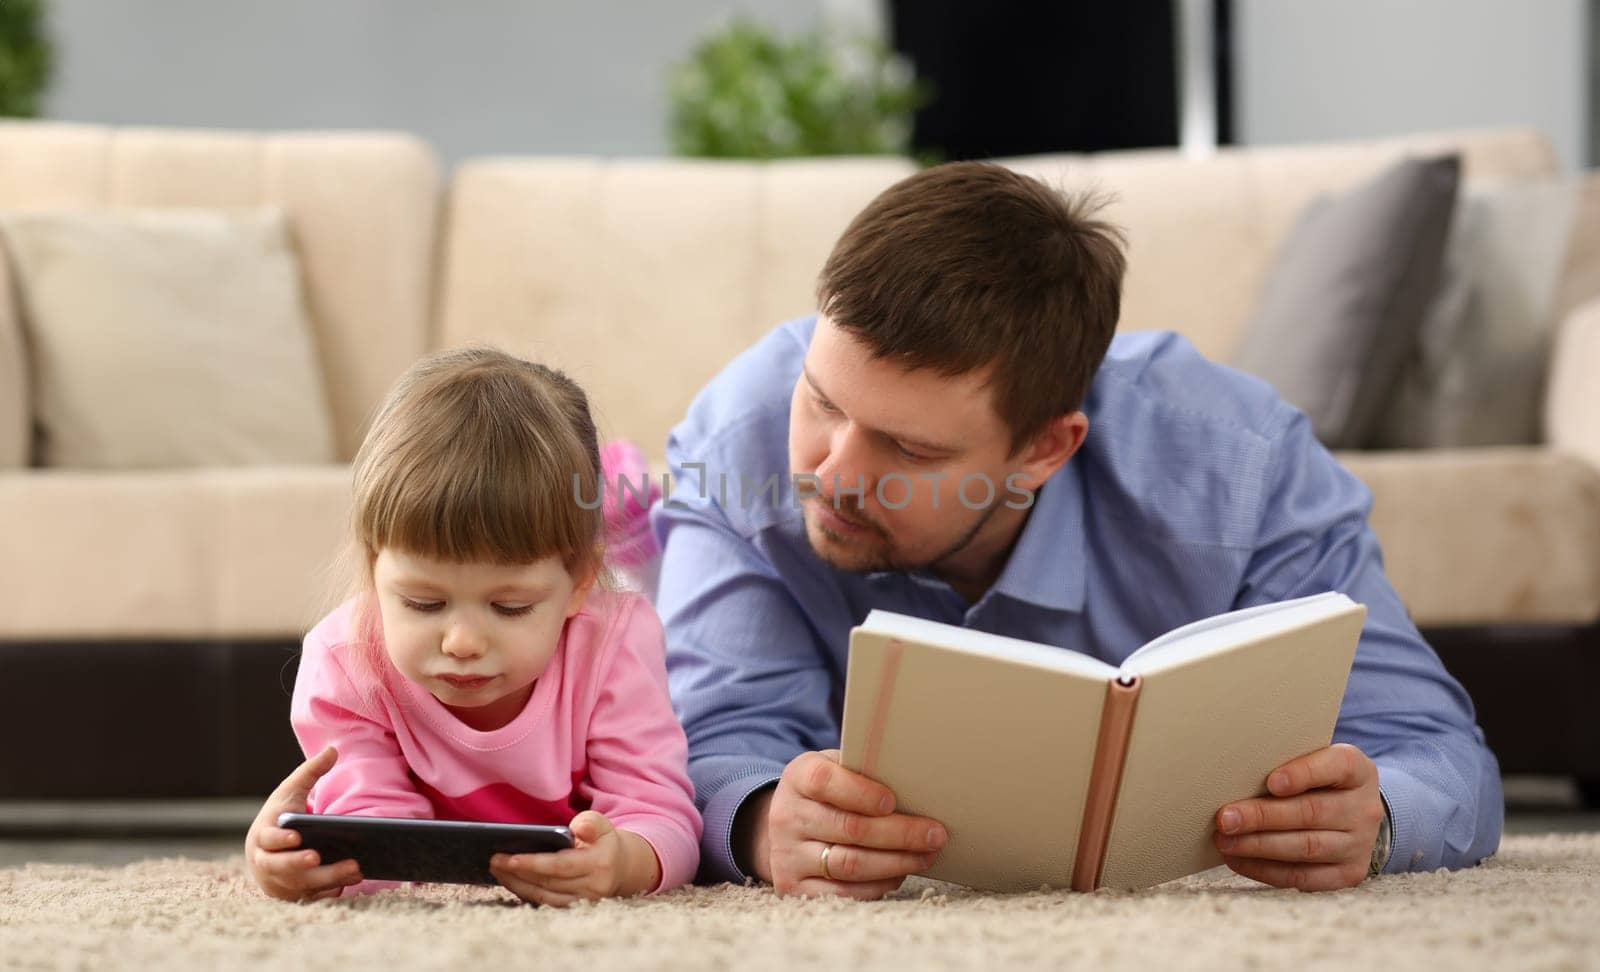 No more communication in family and dependence of children on gadgets by kuprevich